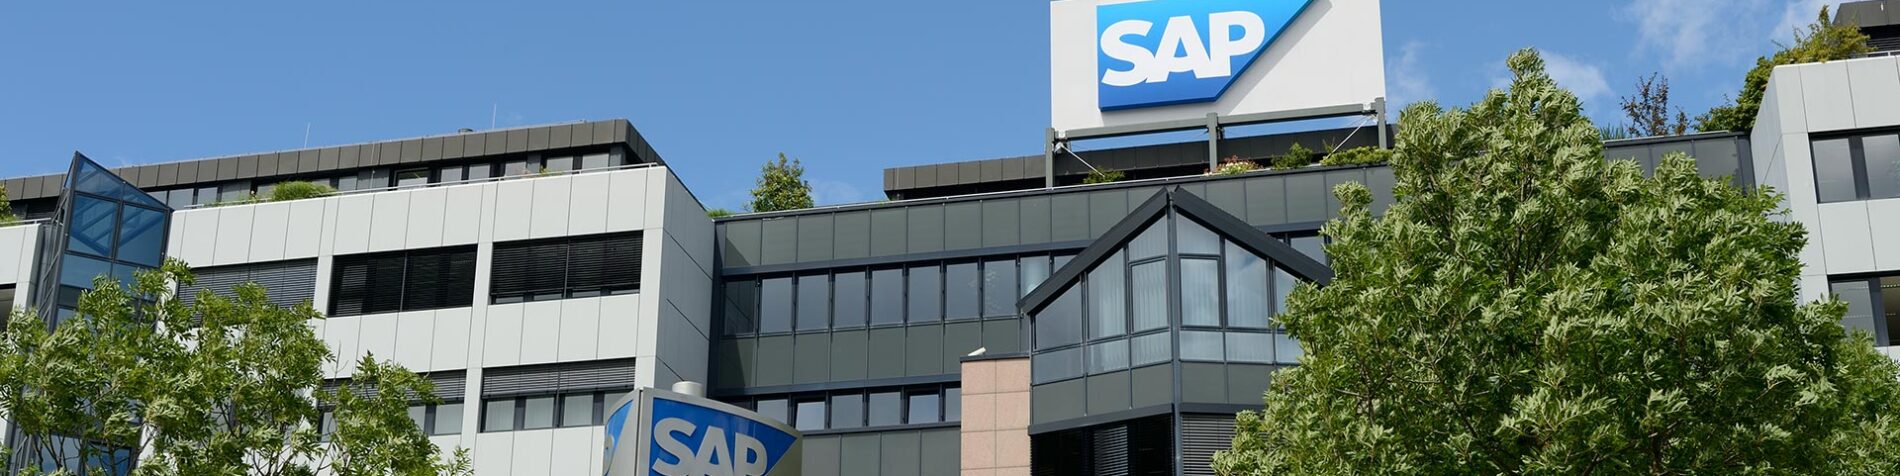 WTA and SAP Team Up to Give Tennis an Analytical Edge With Real-Time Performance Data